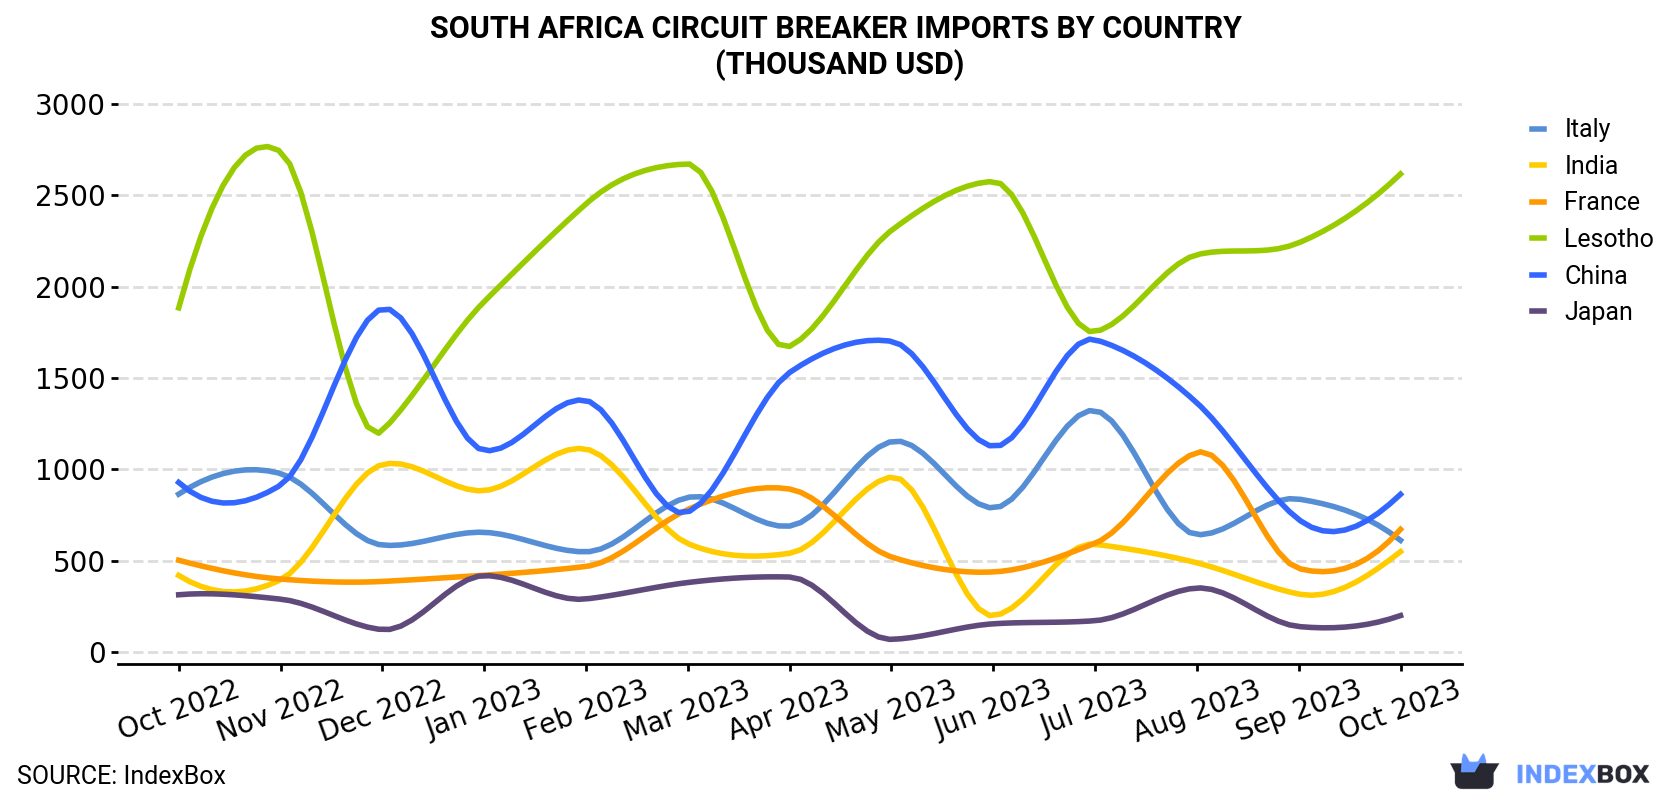 South Africa Circuit Breaker Imports By Country (Thousand USD)